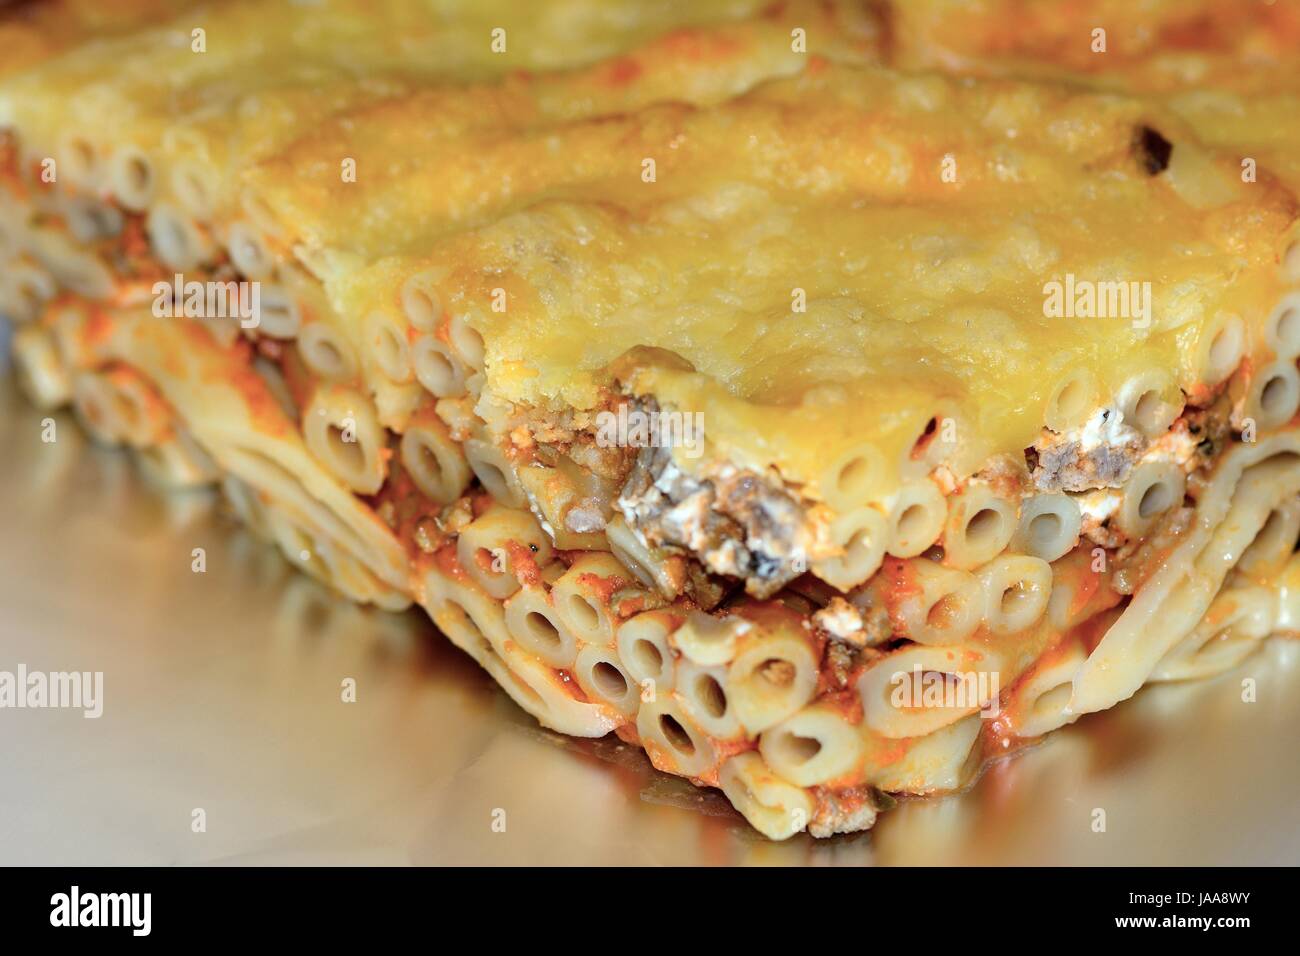 dough, noodles, food, dish, meal, bake over again, crowd, casserole, lasagna, Stock Photo